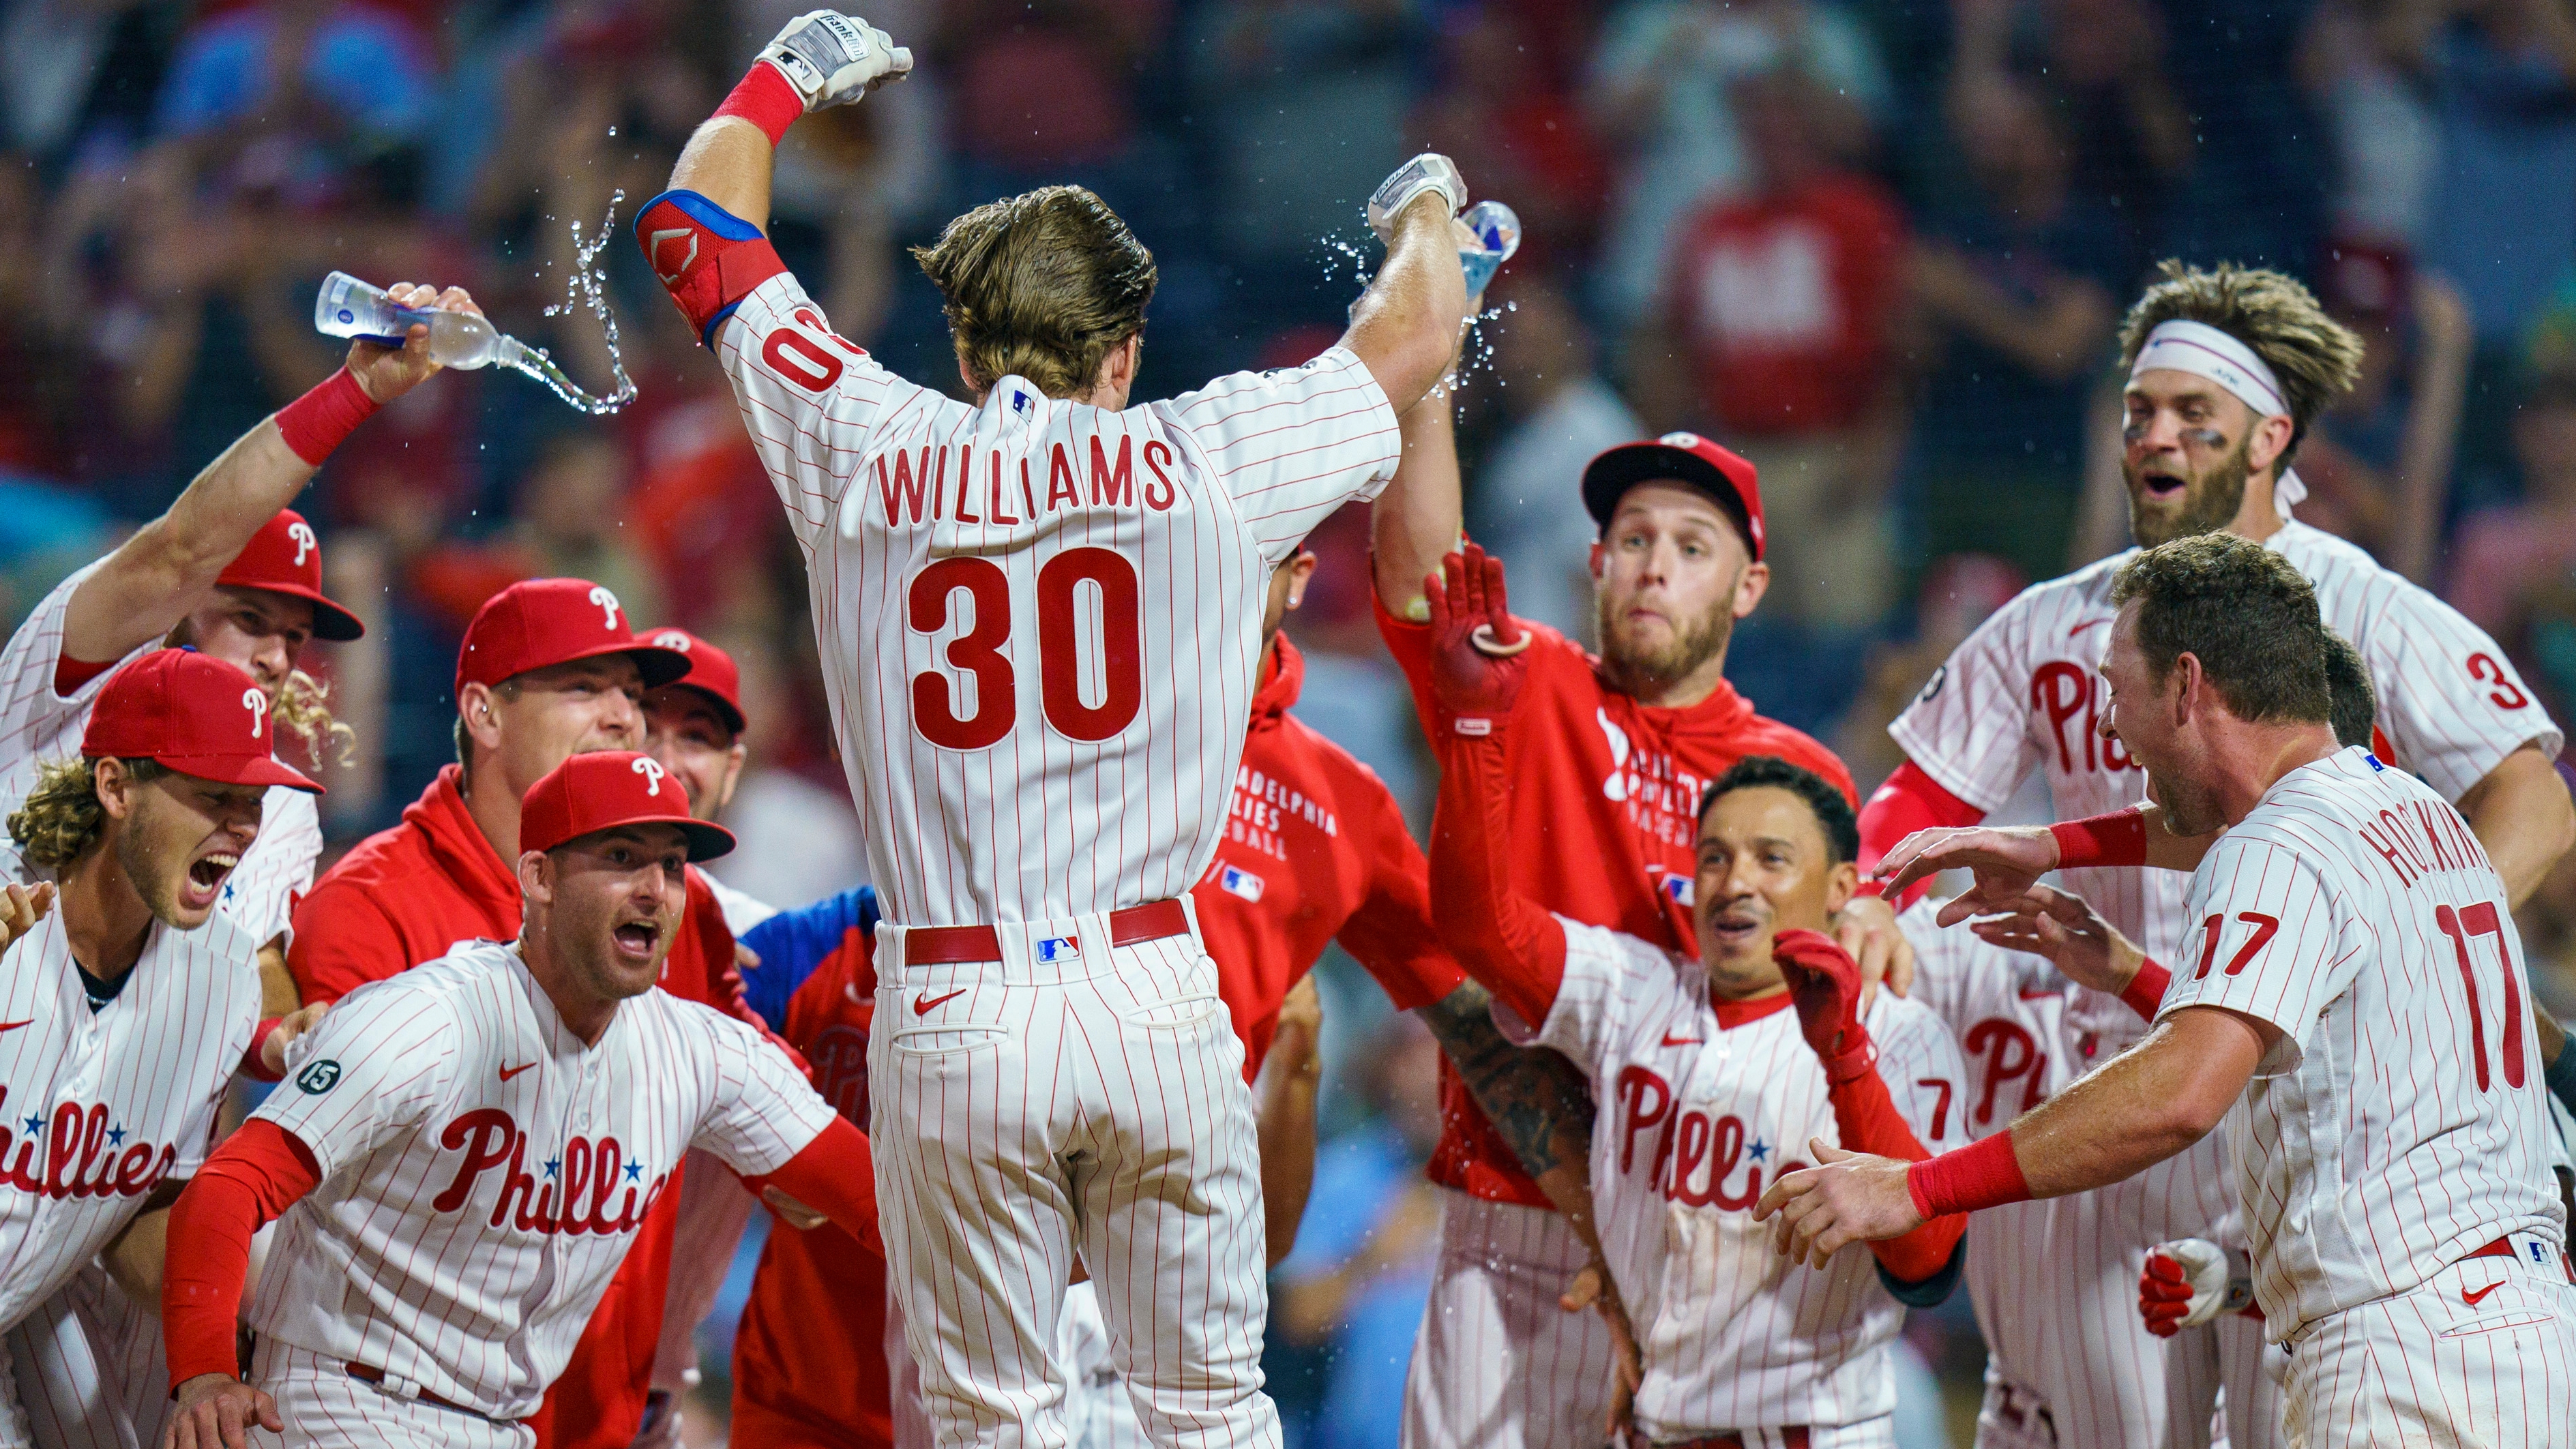 Phillies let one get away as David Robertson blows save in 6-5